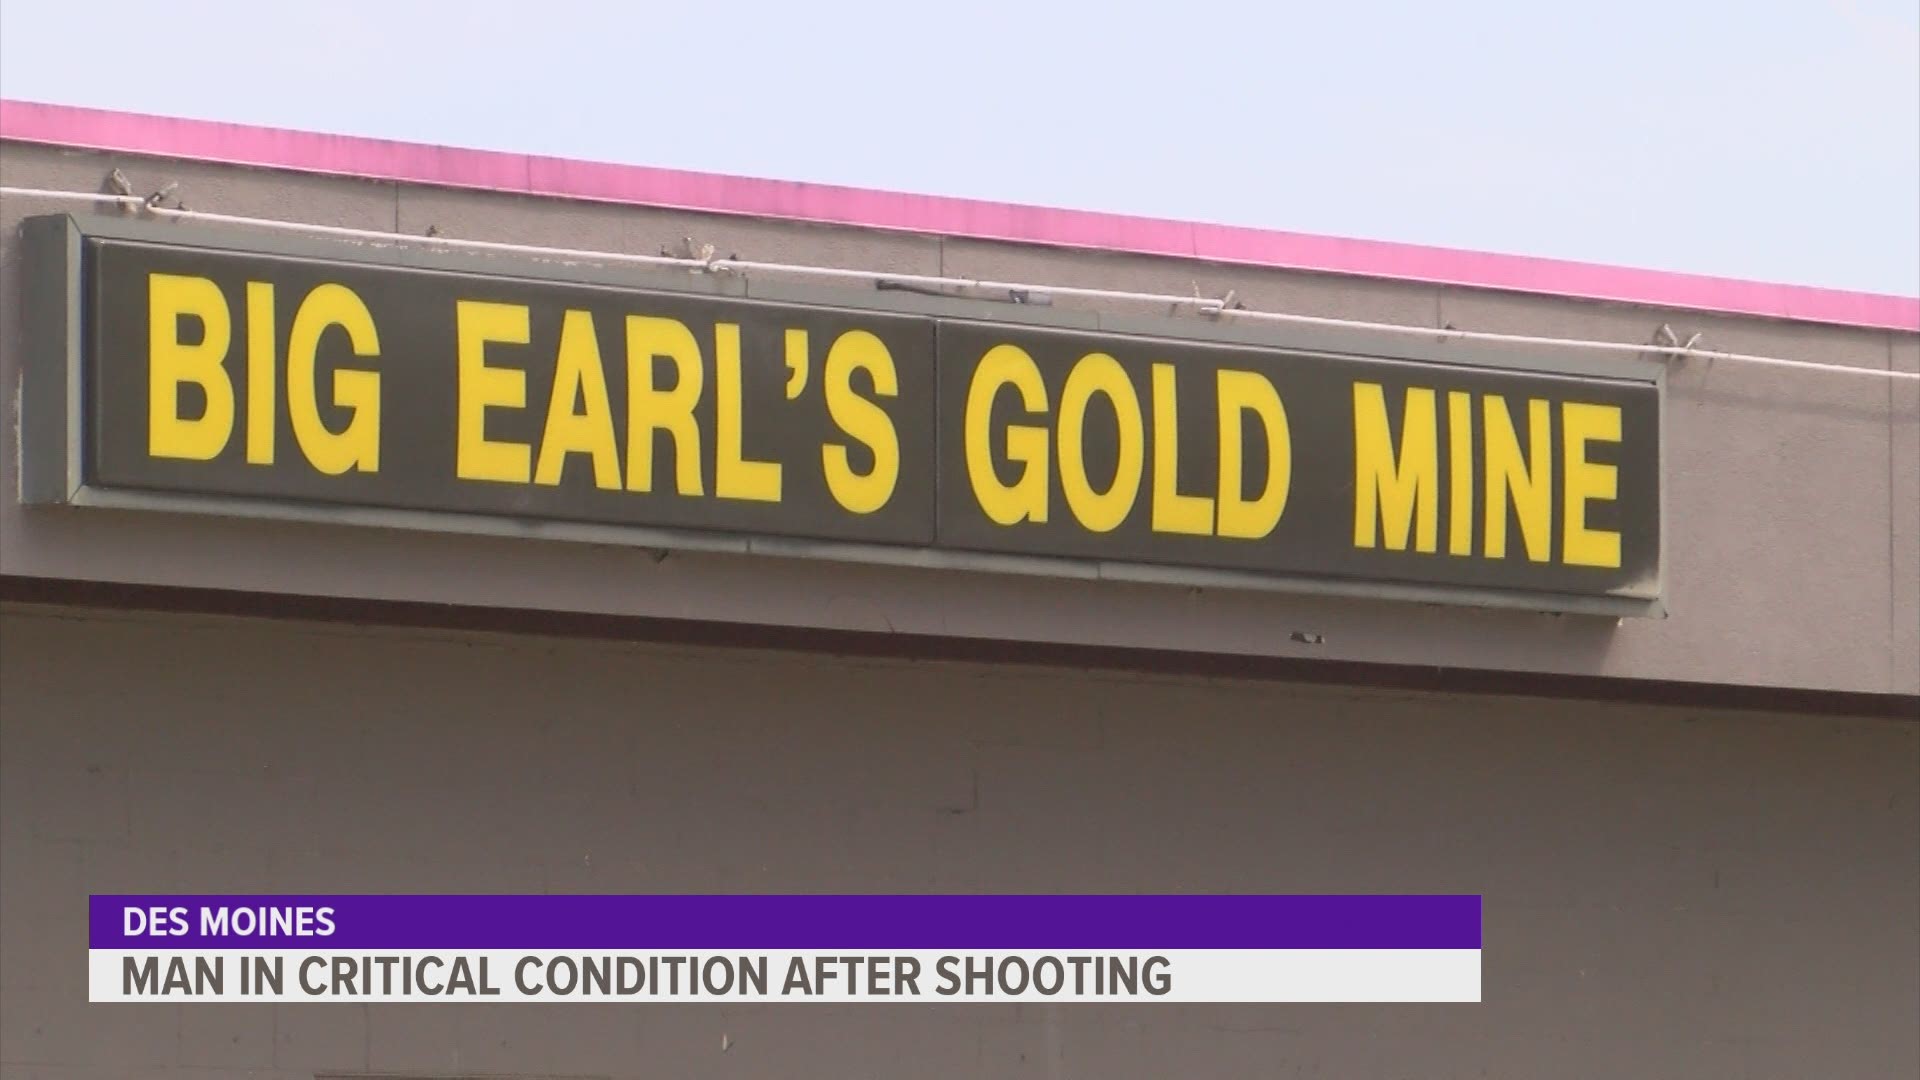 The shooting happened just after four o'clock Sunday morning at Big Earl's Gold Mine, an adult entertainment venue on NW 2nd Street.